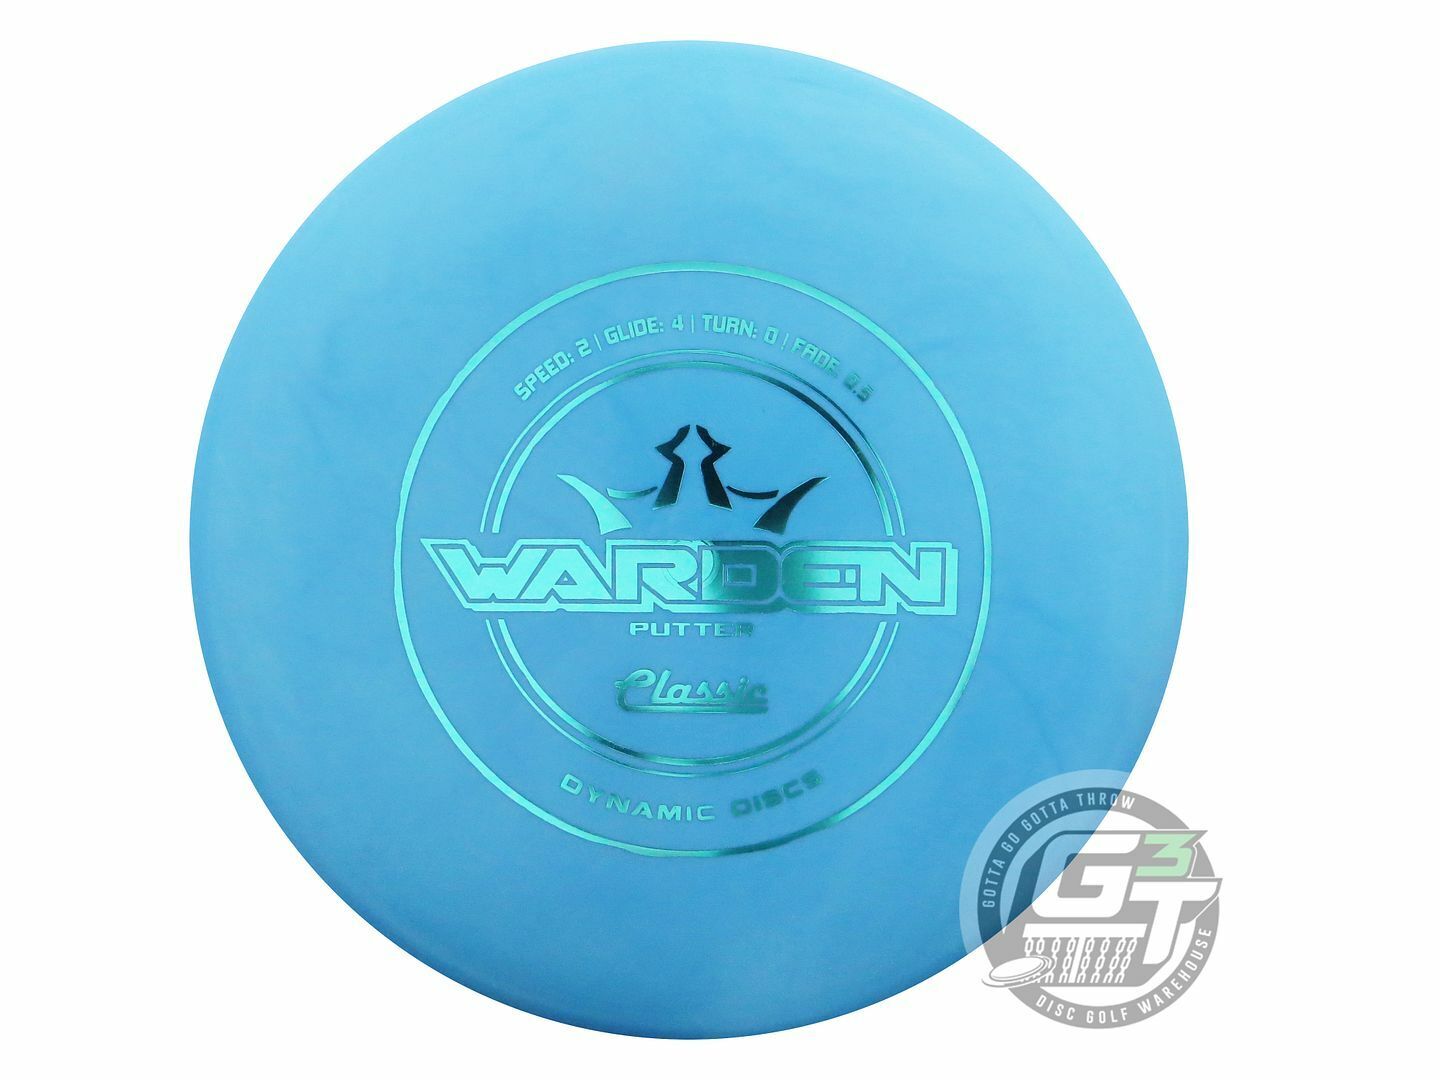 Dynamic Discs Classic Line Warden Putter Golf Disc (Individually Listed)